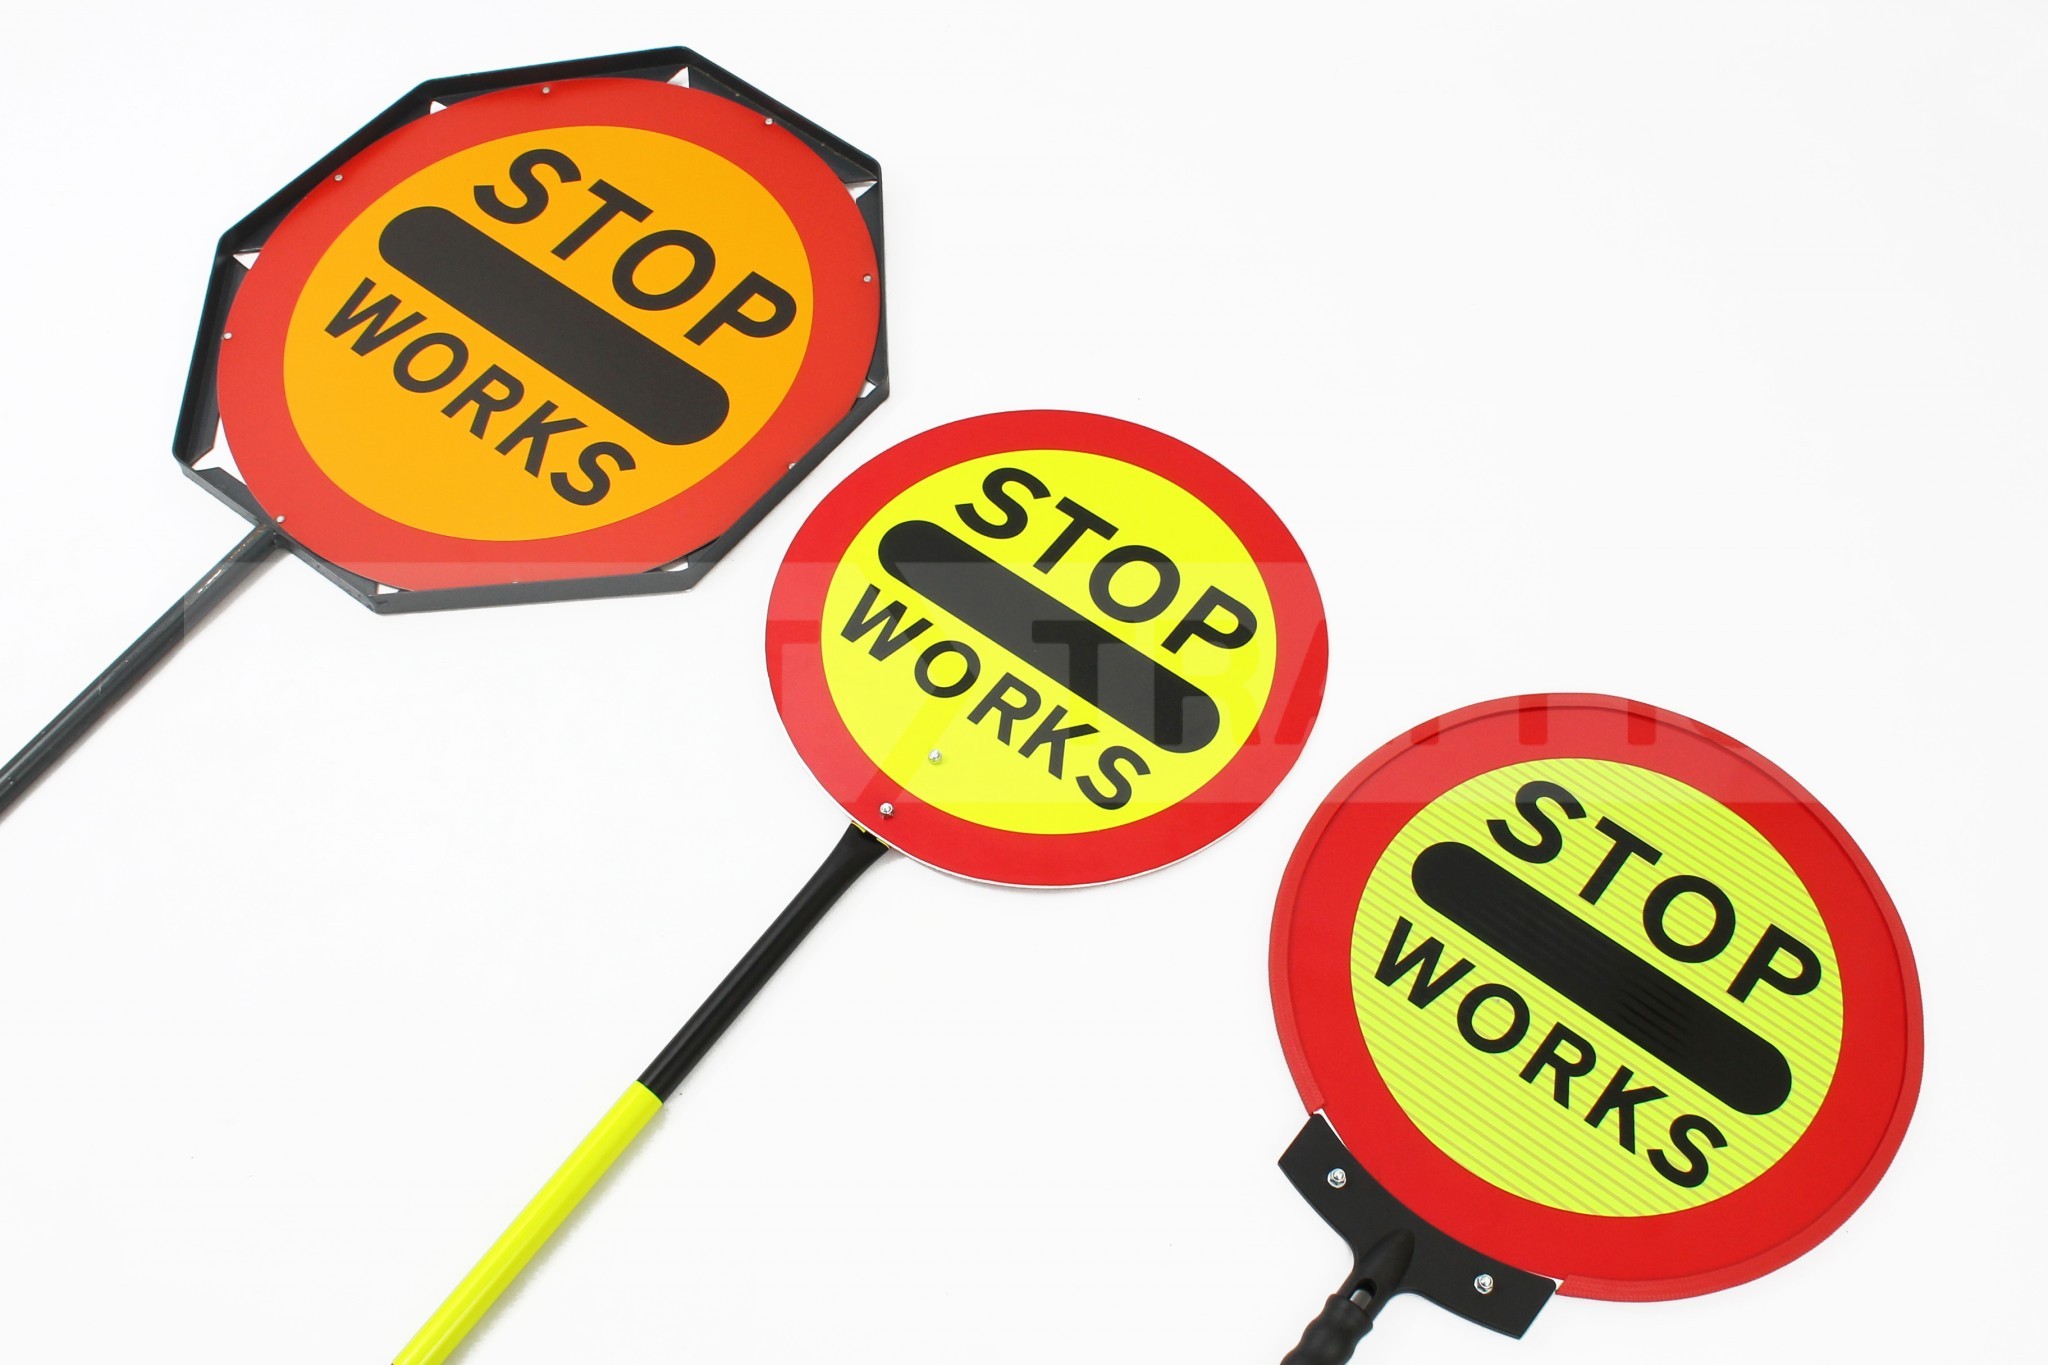 STOP WORKS signs